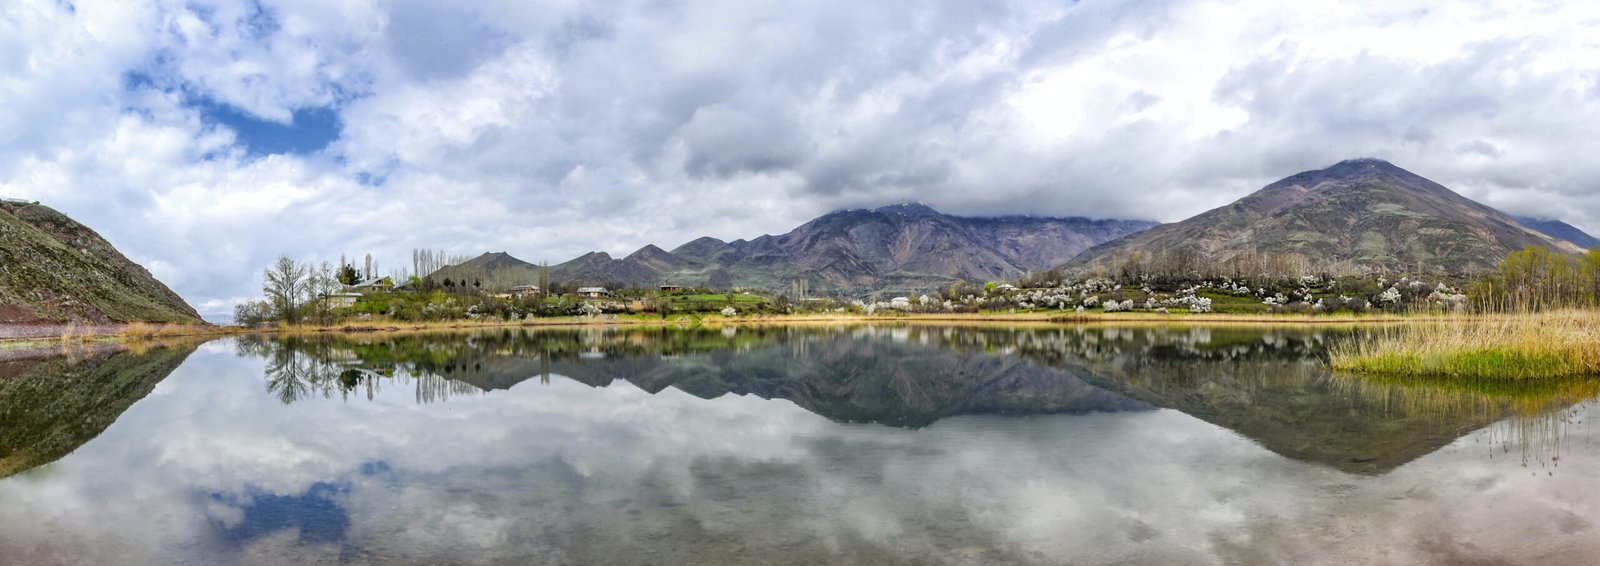 body of water near mountain under cloudy sky during daytime